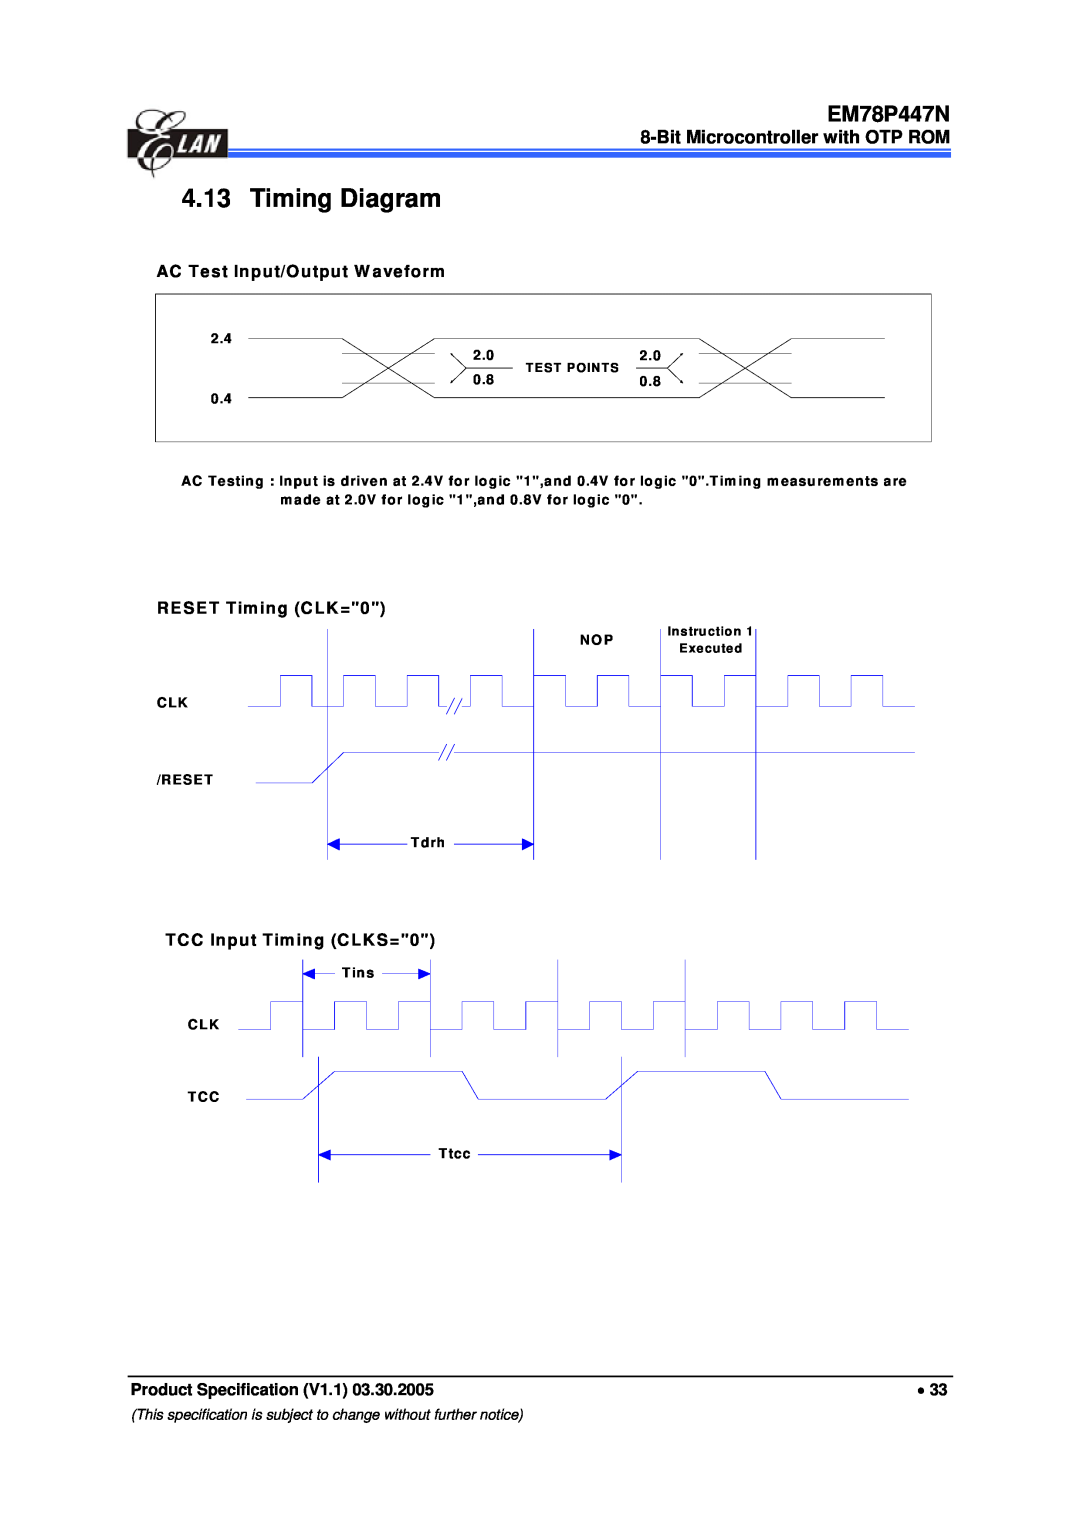 IBM EM78P447N Timing Diagram, This specification is subject to change without further notice, Test Points, Instruction 